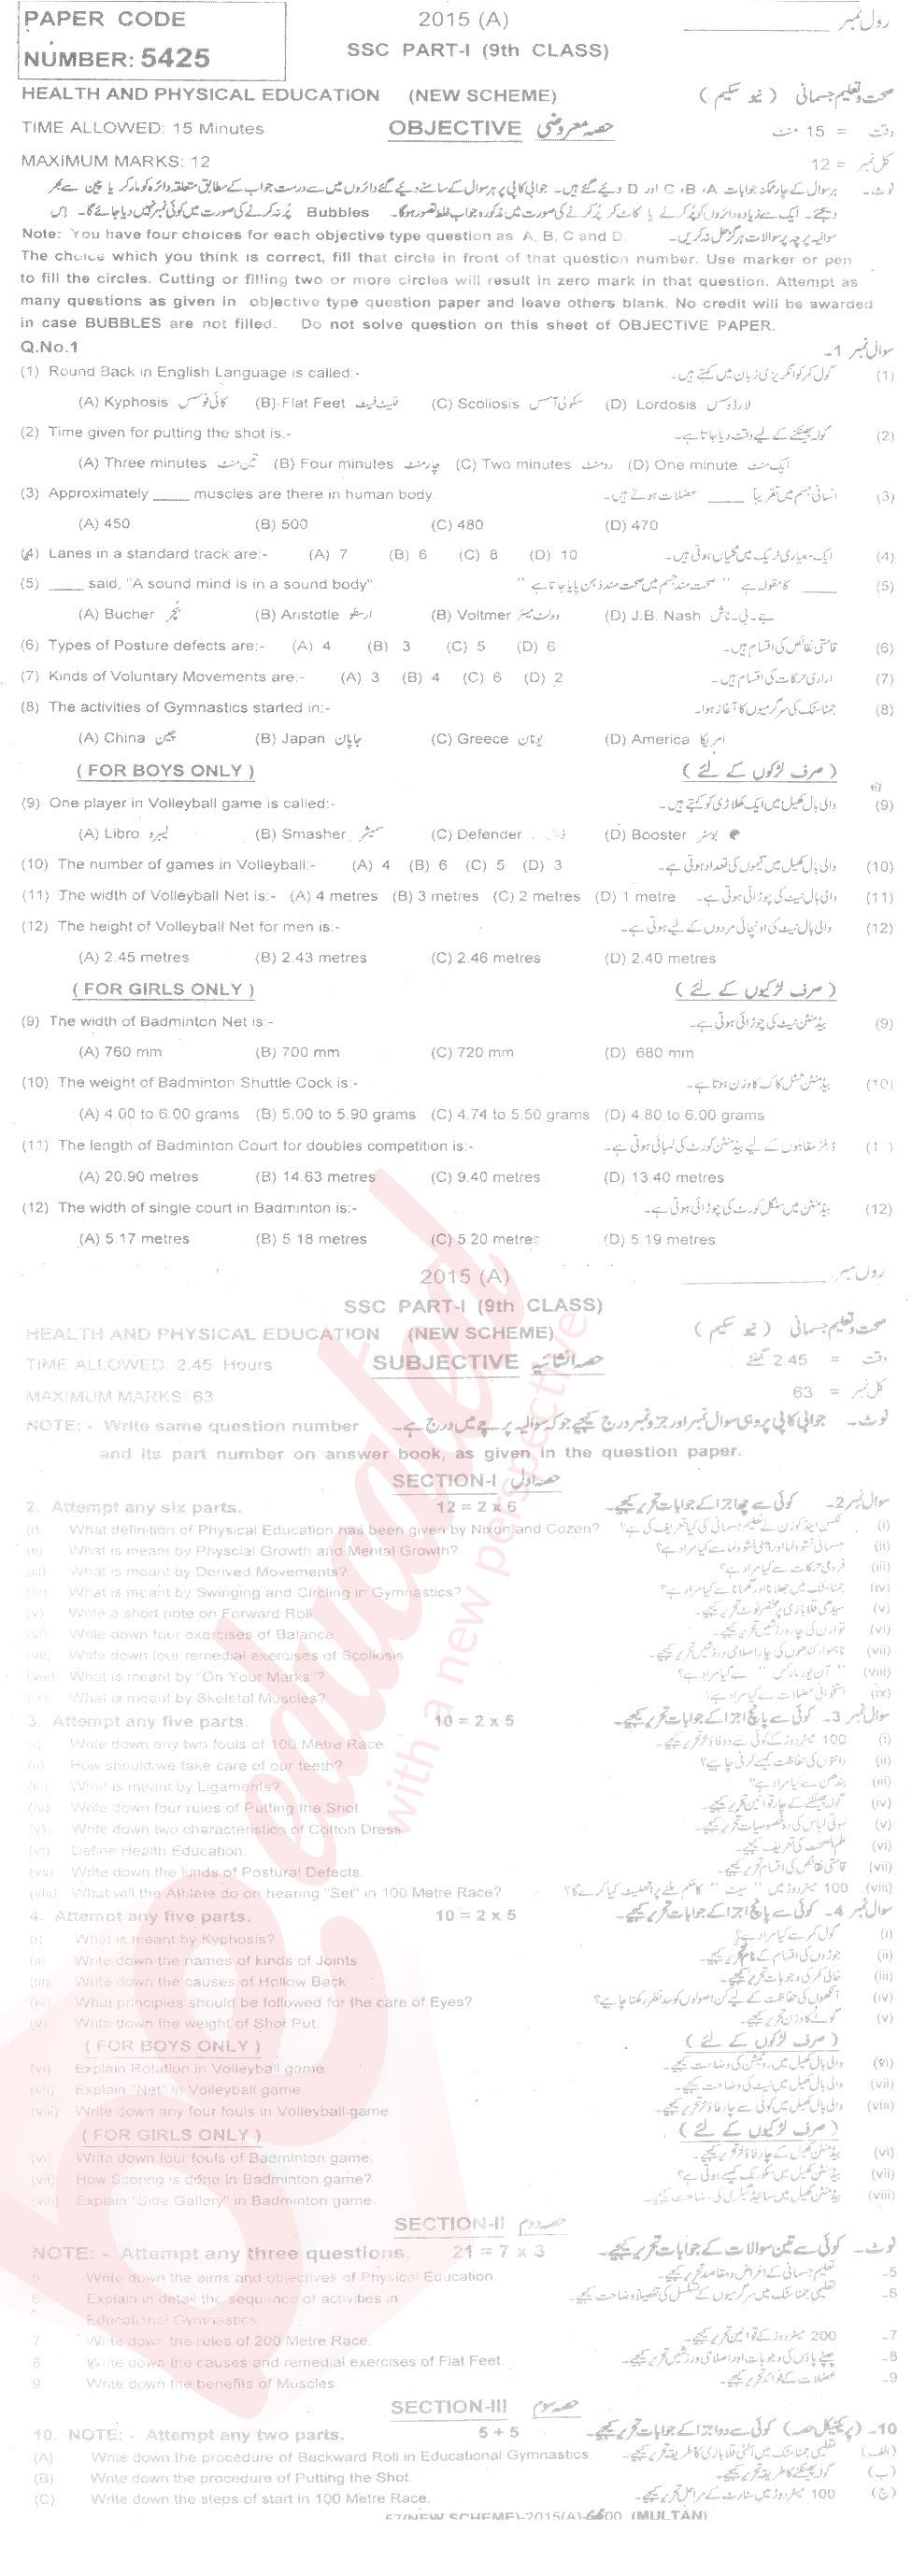 Health and Physical Education 9th English Medium Past Paper Group 1 BISE Multan 2015